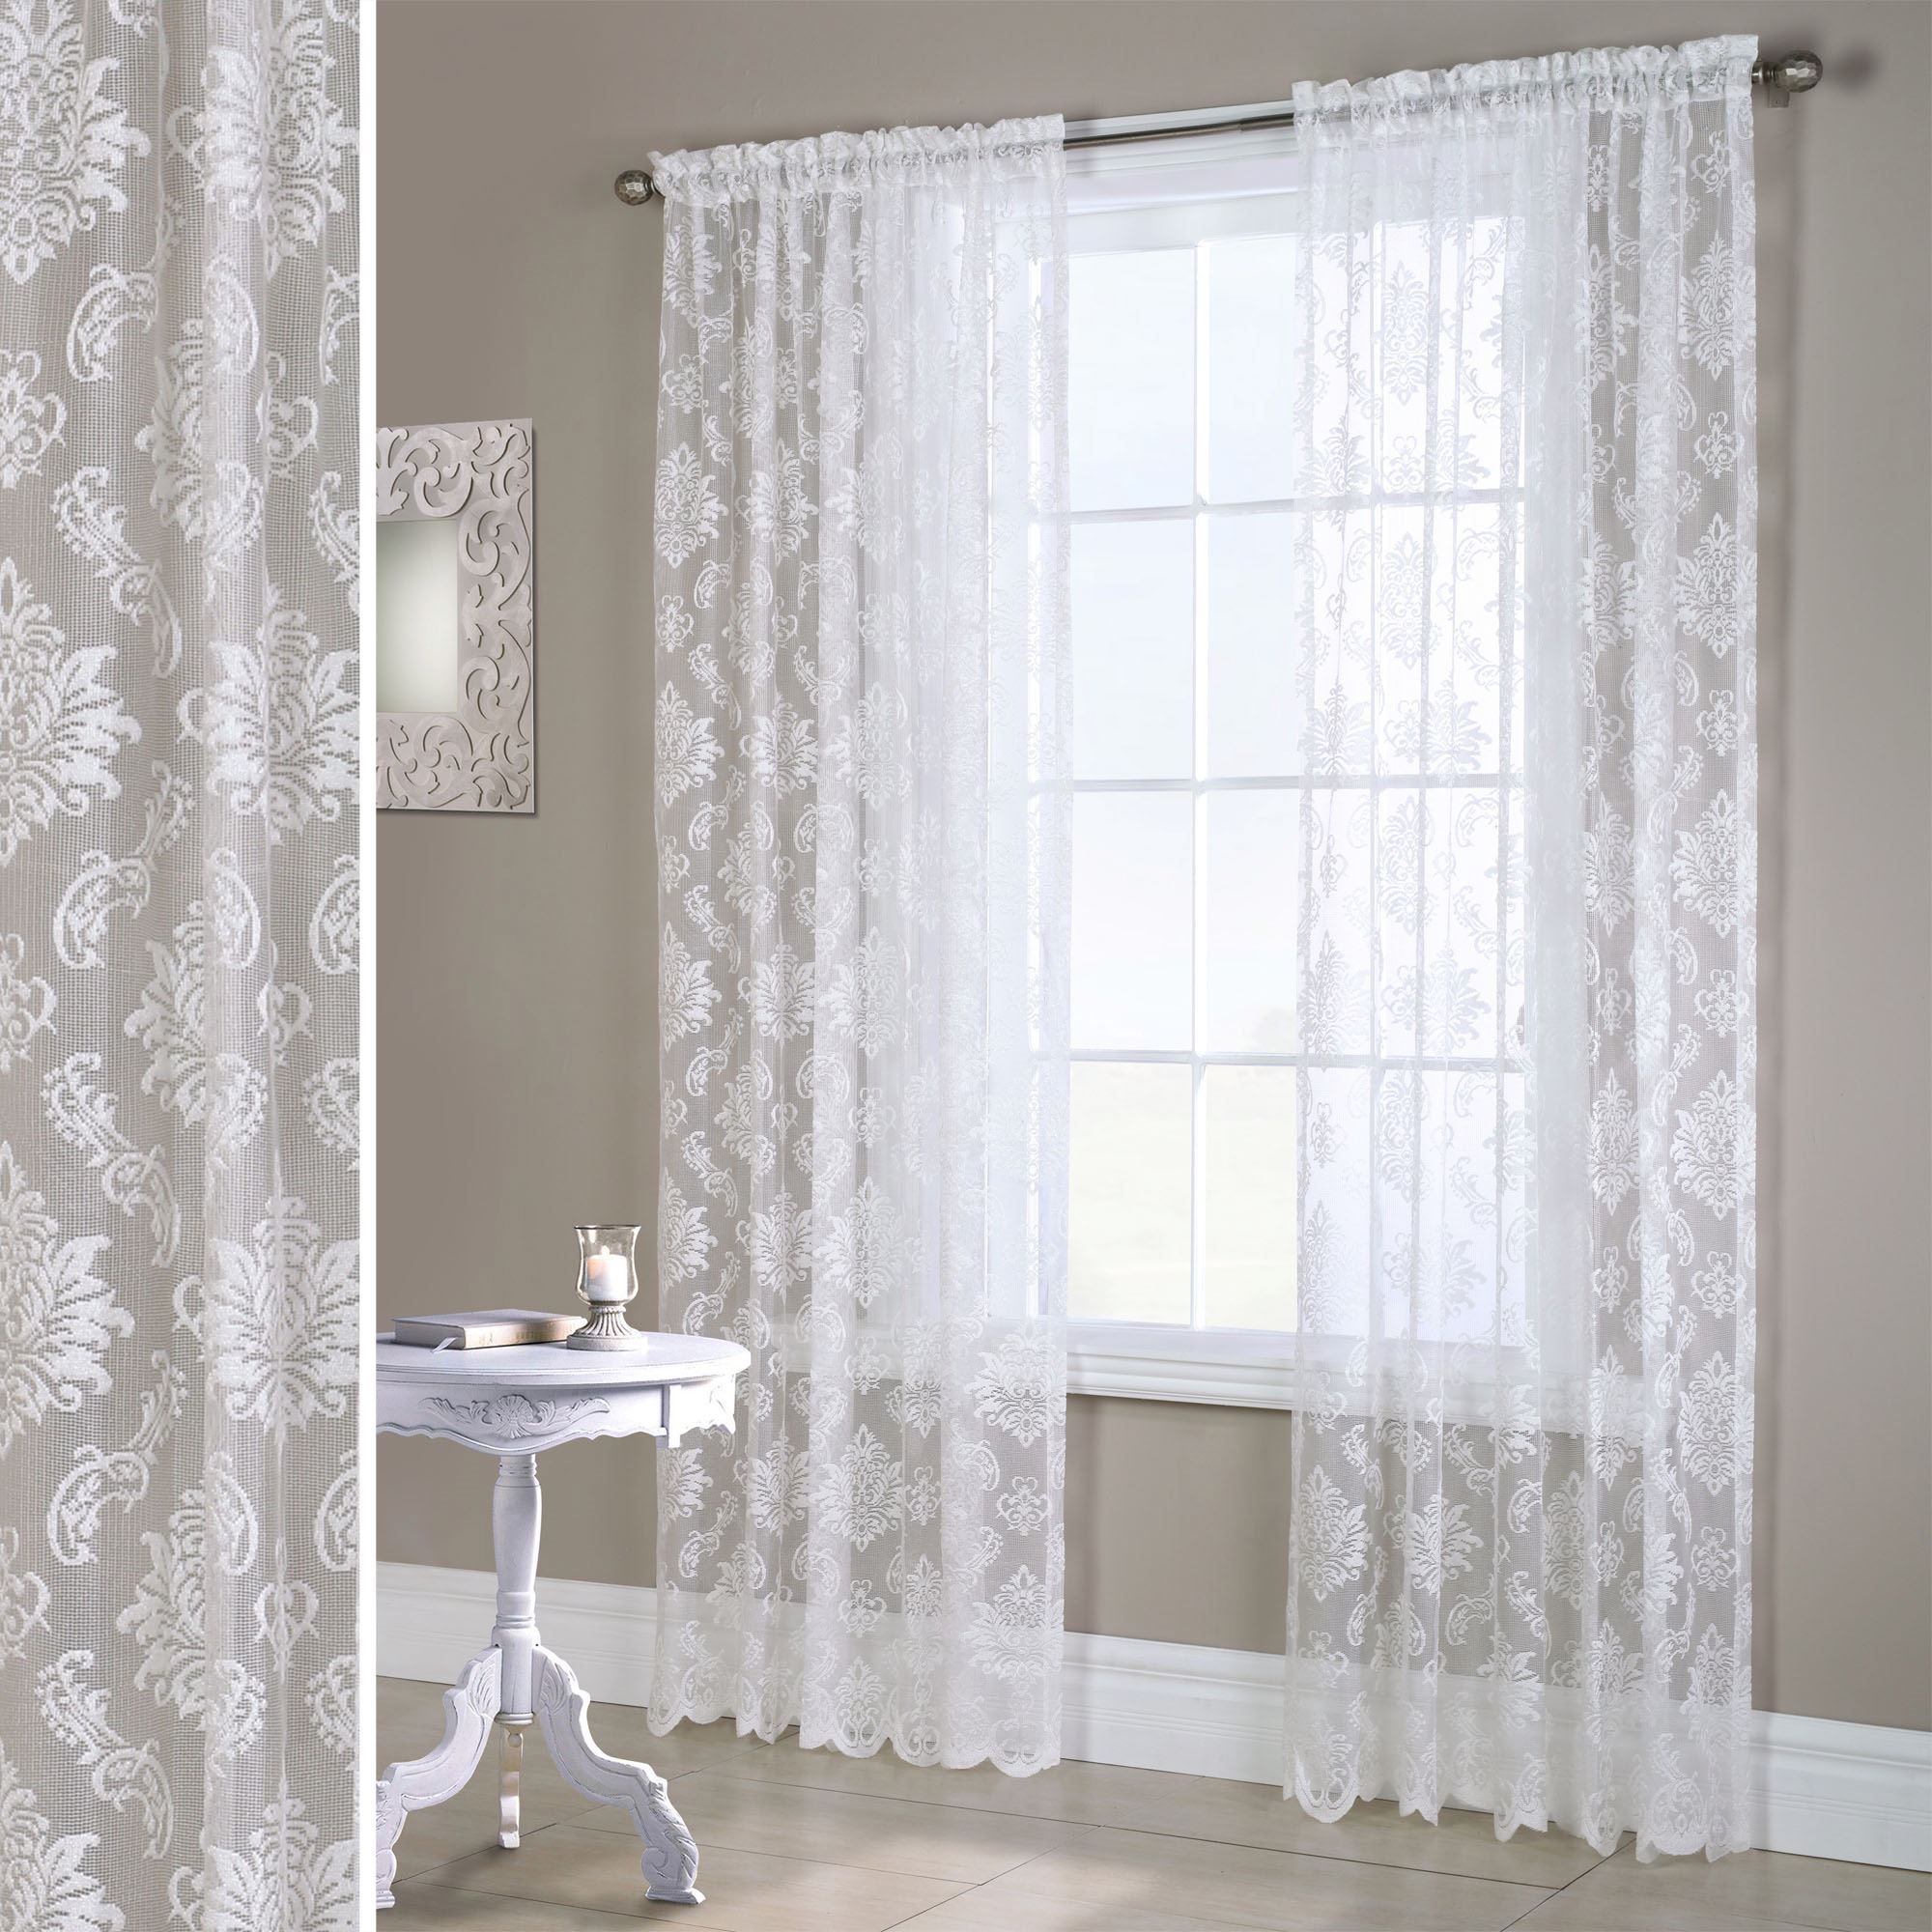 Elora White Heavyweight Lace Window Treatment Intended For Lace Curtains (View 19 of 25)